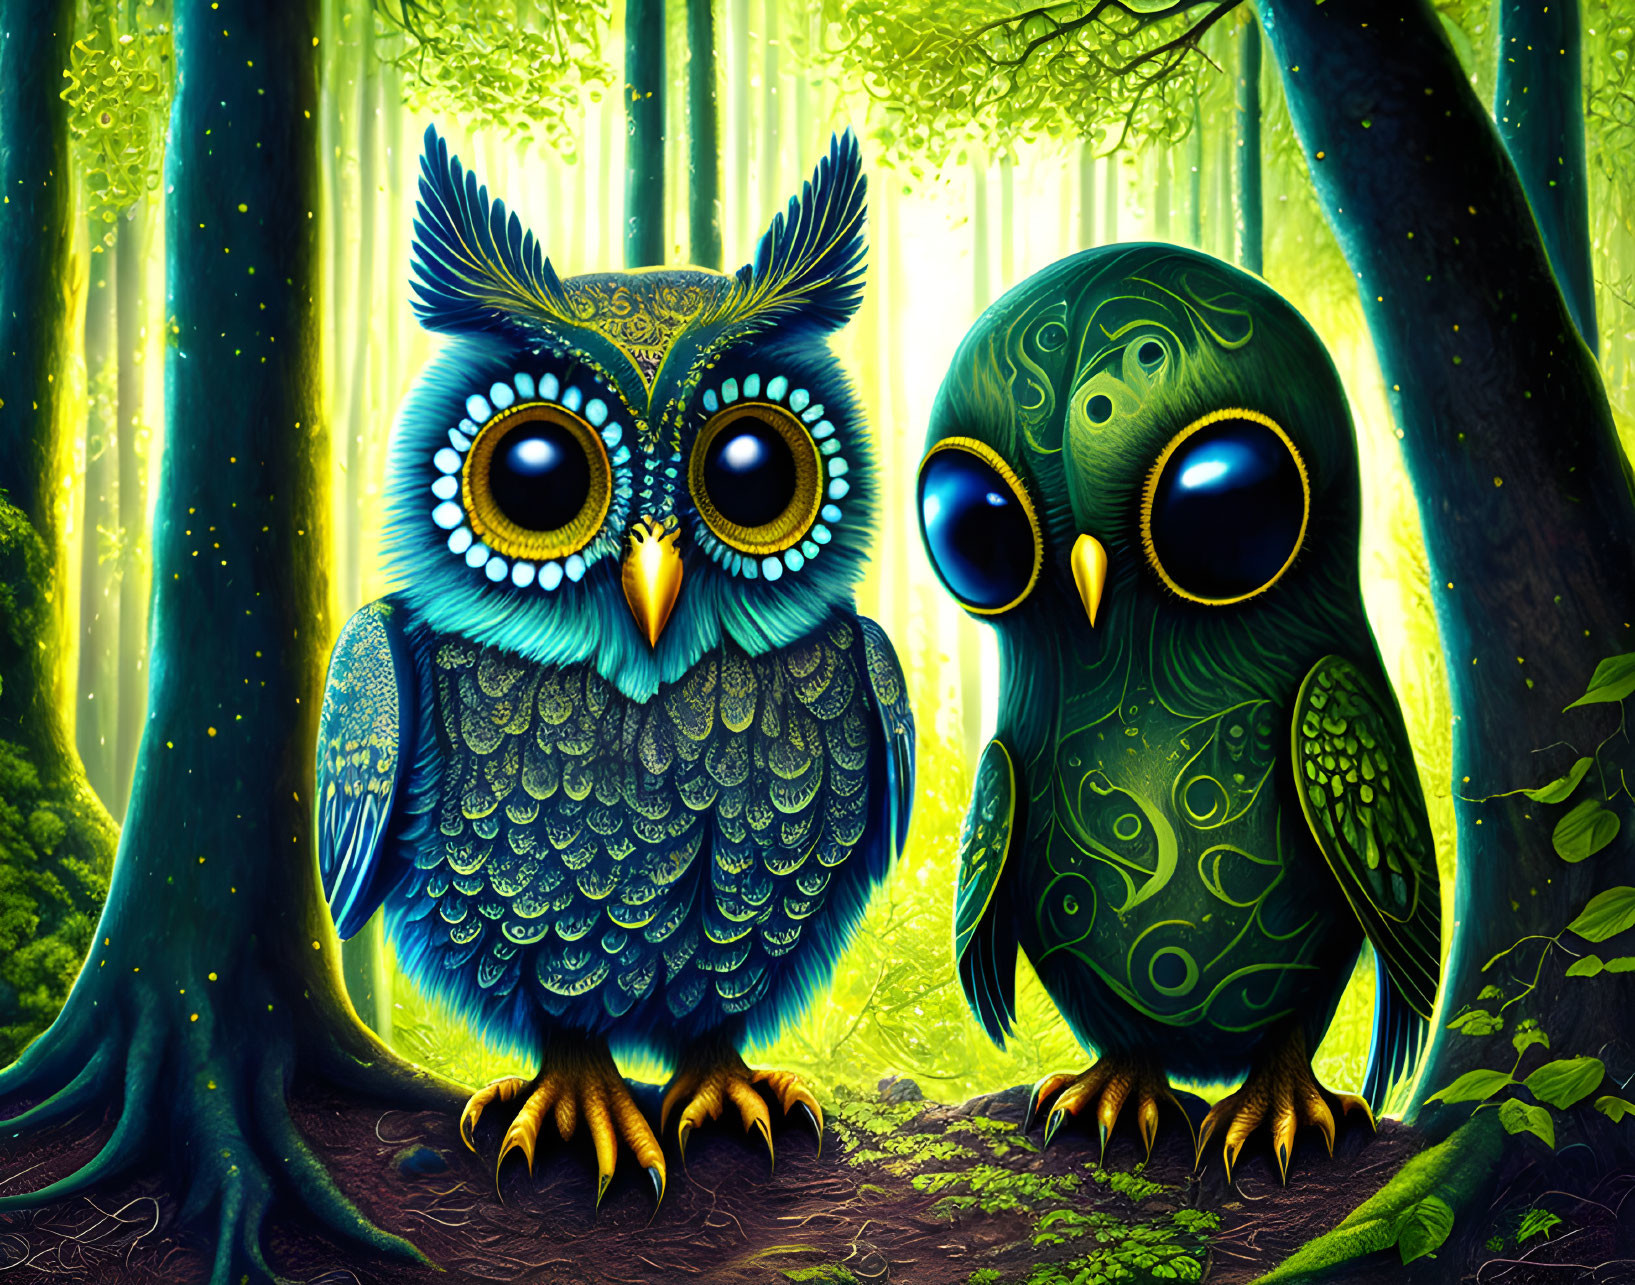 Colorful Stylized Owls in Enchanted Green Forest